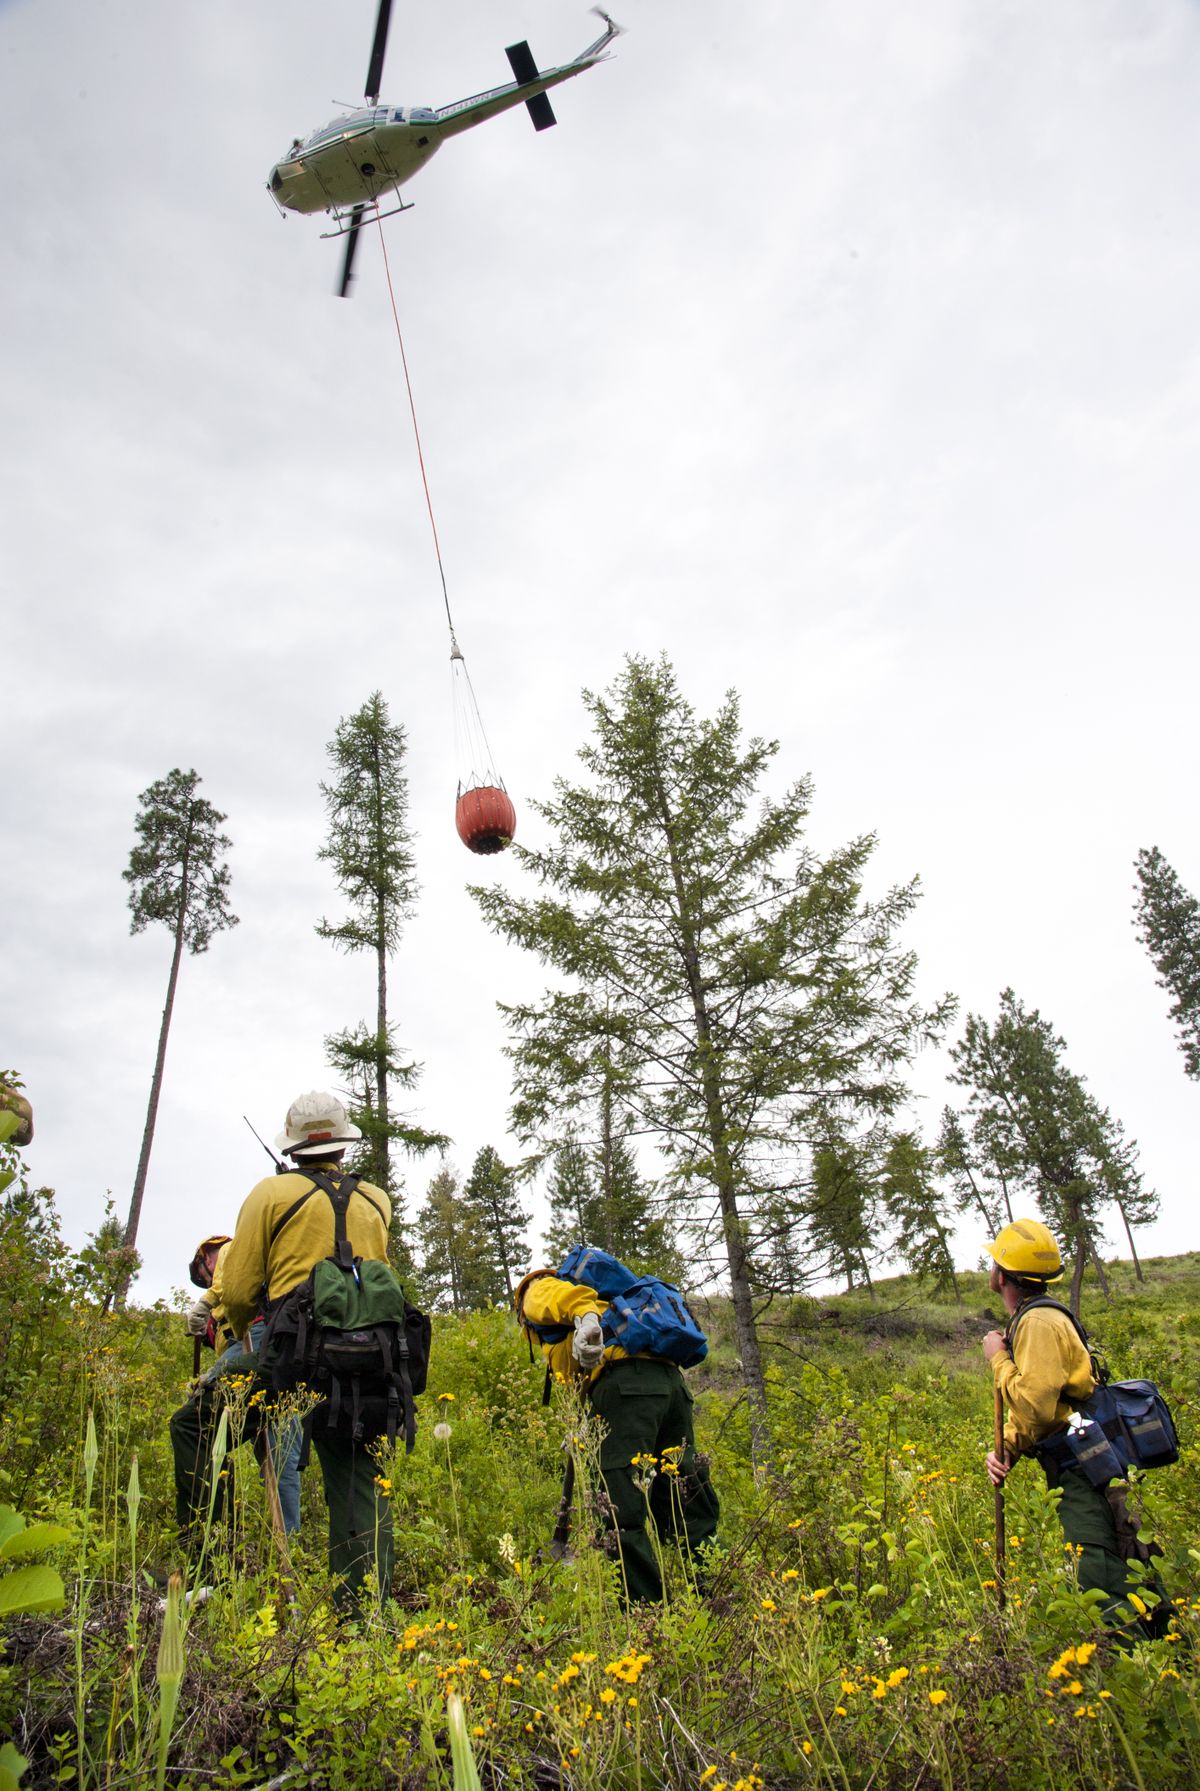 DNR fire crews dig a fire line as a helicopter prepares to drop water during Helitack training Wednesday off Pingston Creek Road near Colville. (Dan Pelle)